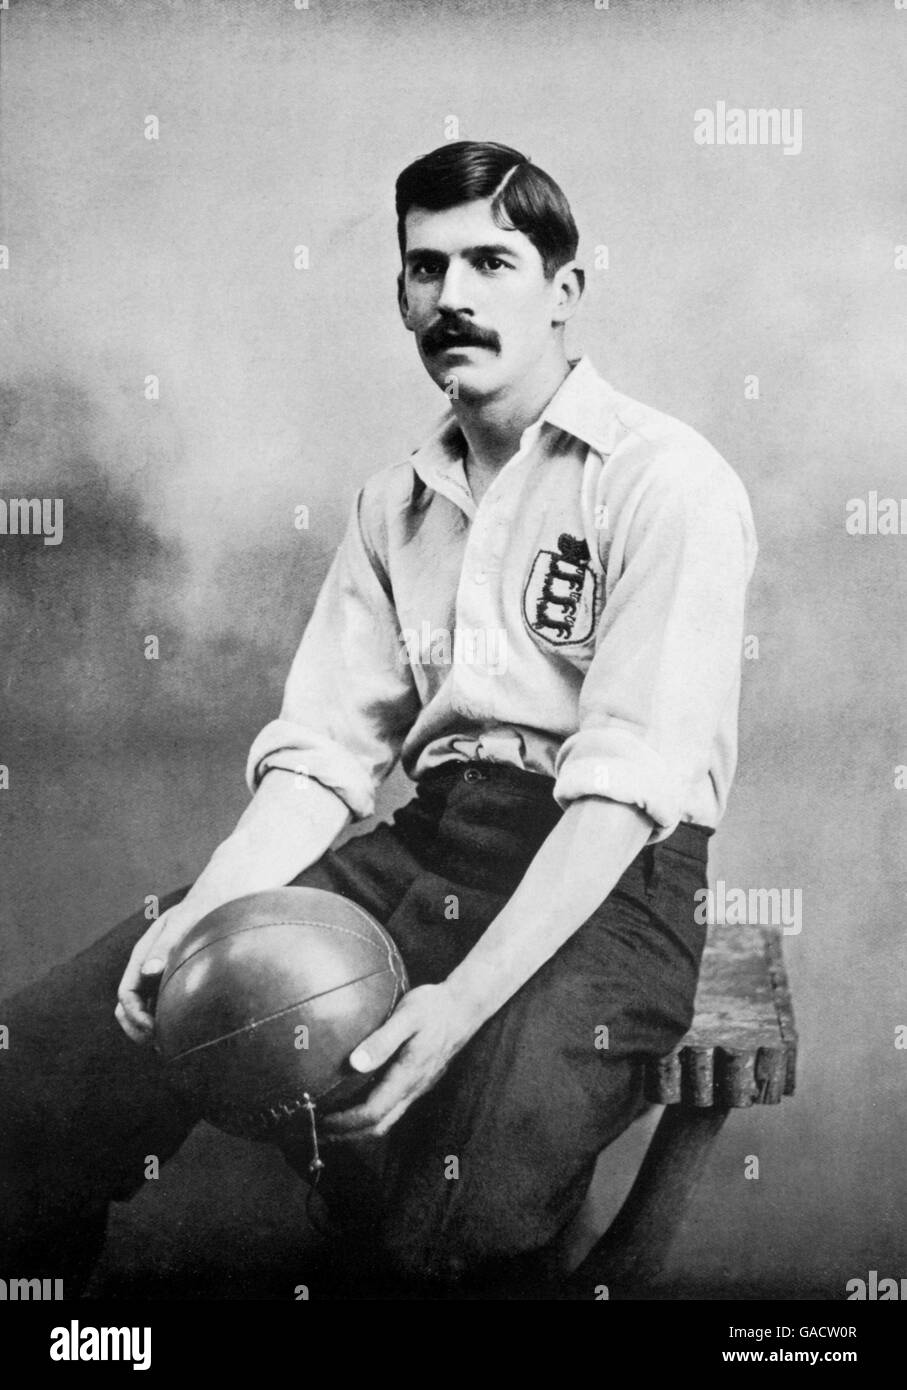 Charles Wreford-Brown, Corinthians and England - credited with coining the term 'soccer'. When asked by a friend at Cambridge University if he fancied a game of rugger, Brown replied that he preferred to play soccer, a contraction of Association Football Stock Photo